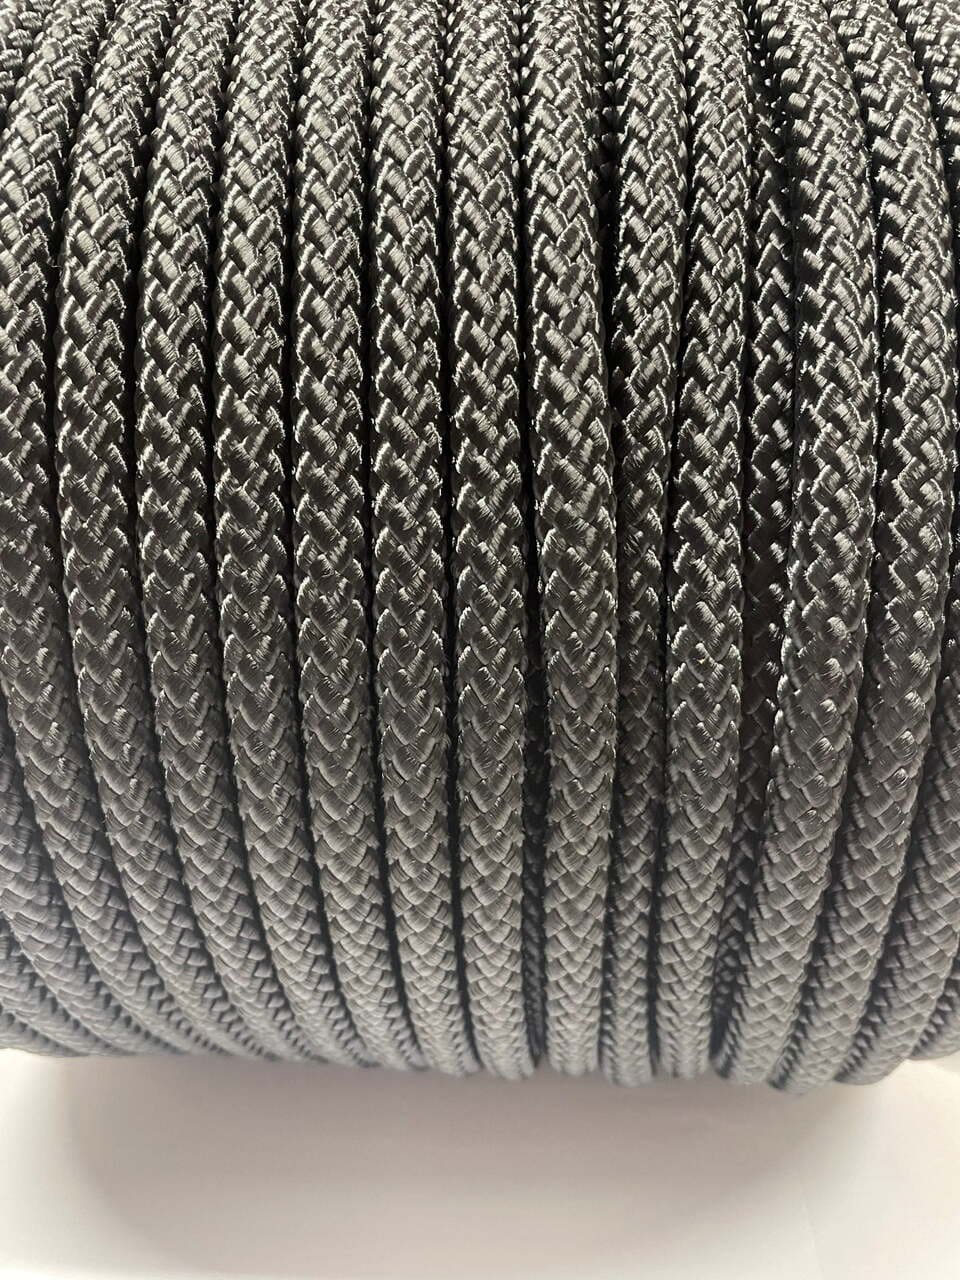 Polyester double braided rope black